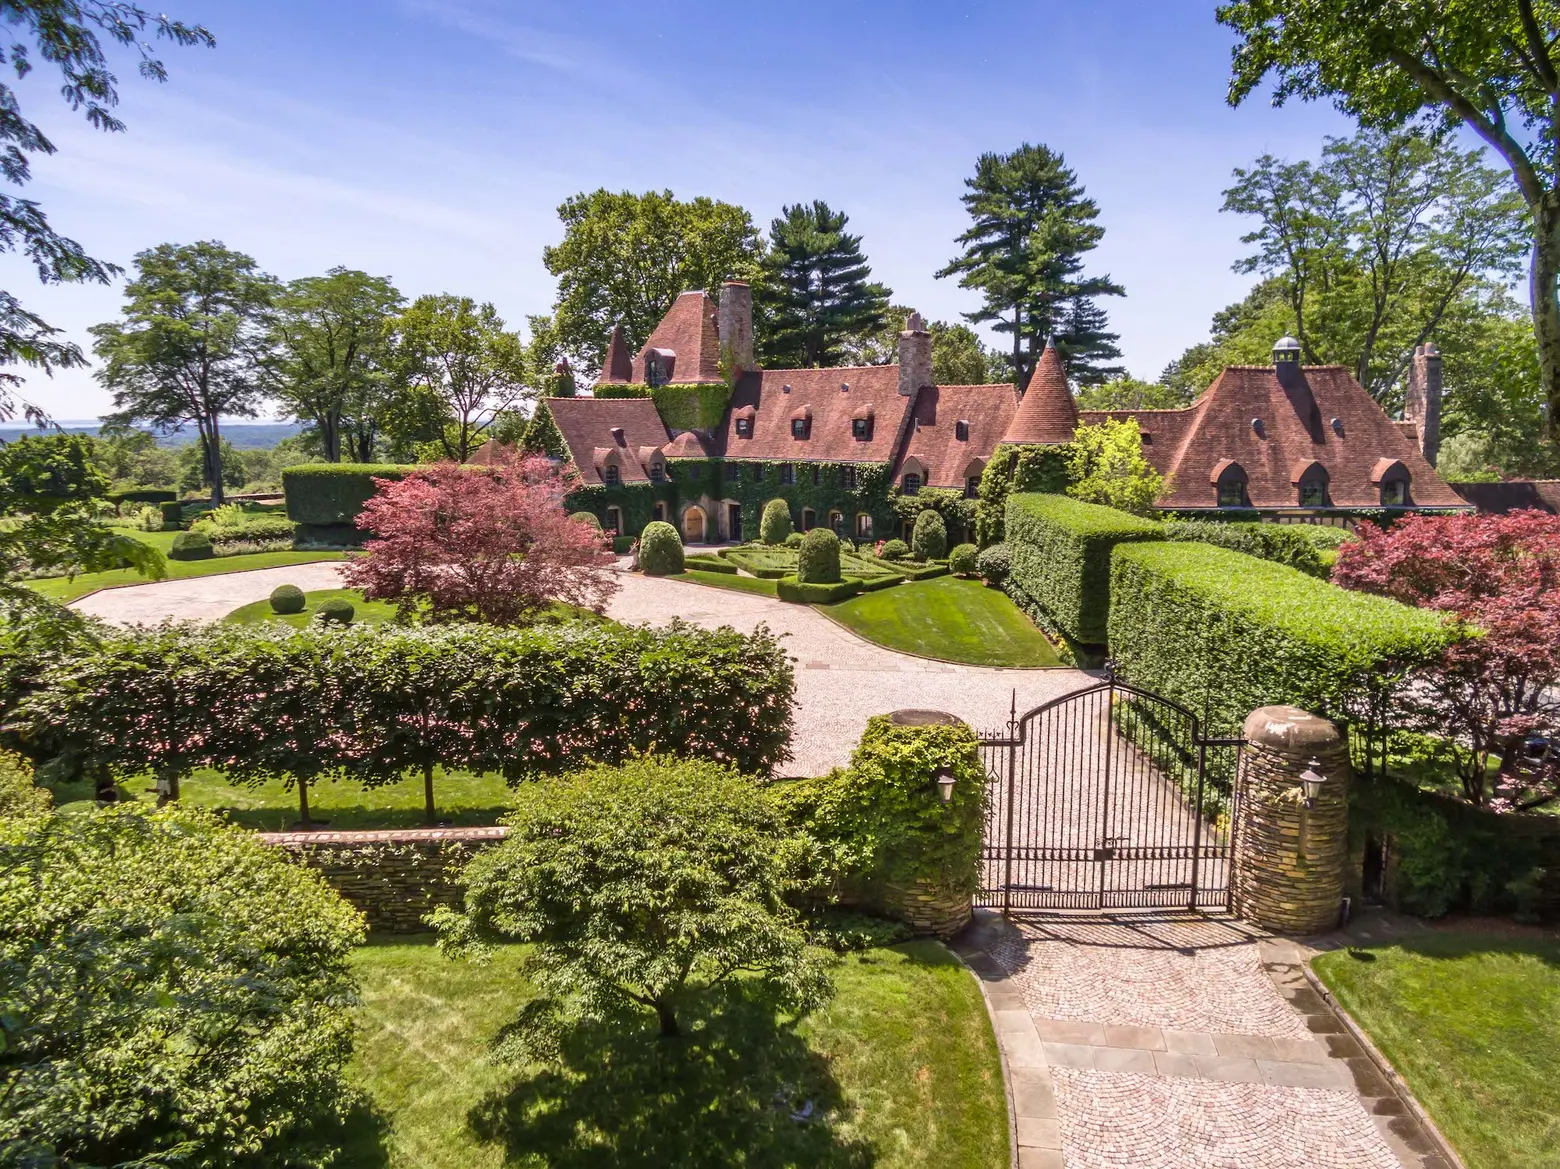 Late fashion designer Vince Camuto's Connecticut chateau is coming to  auction